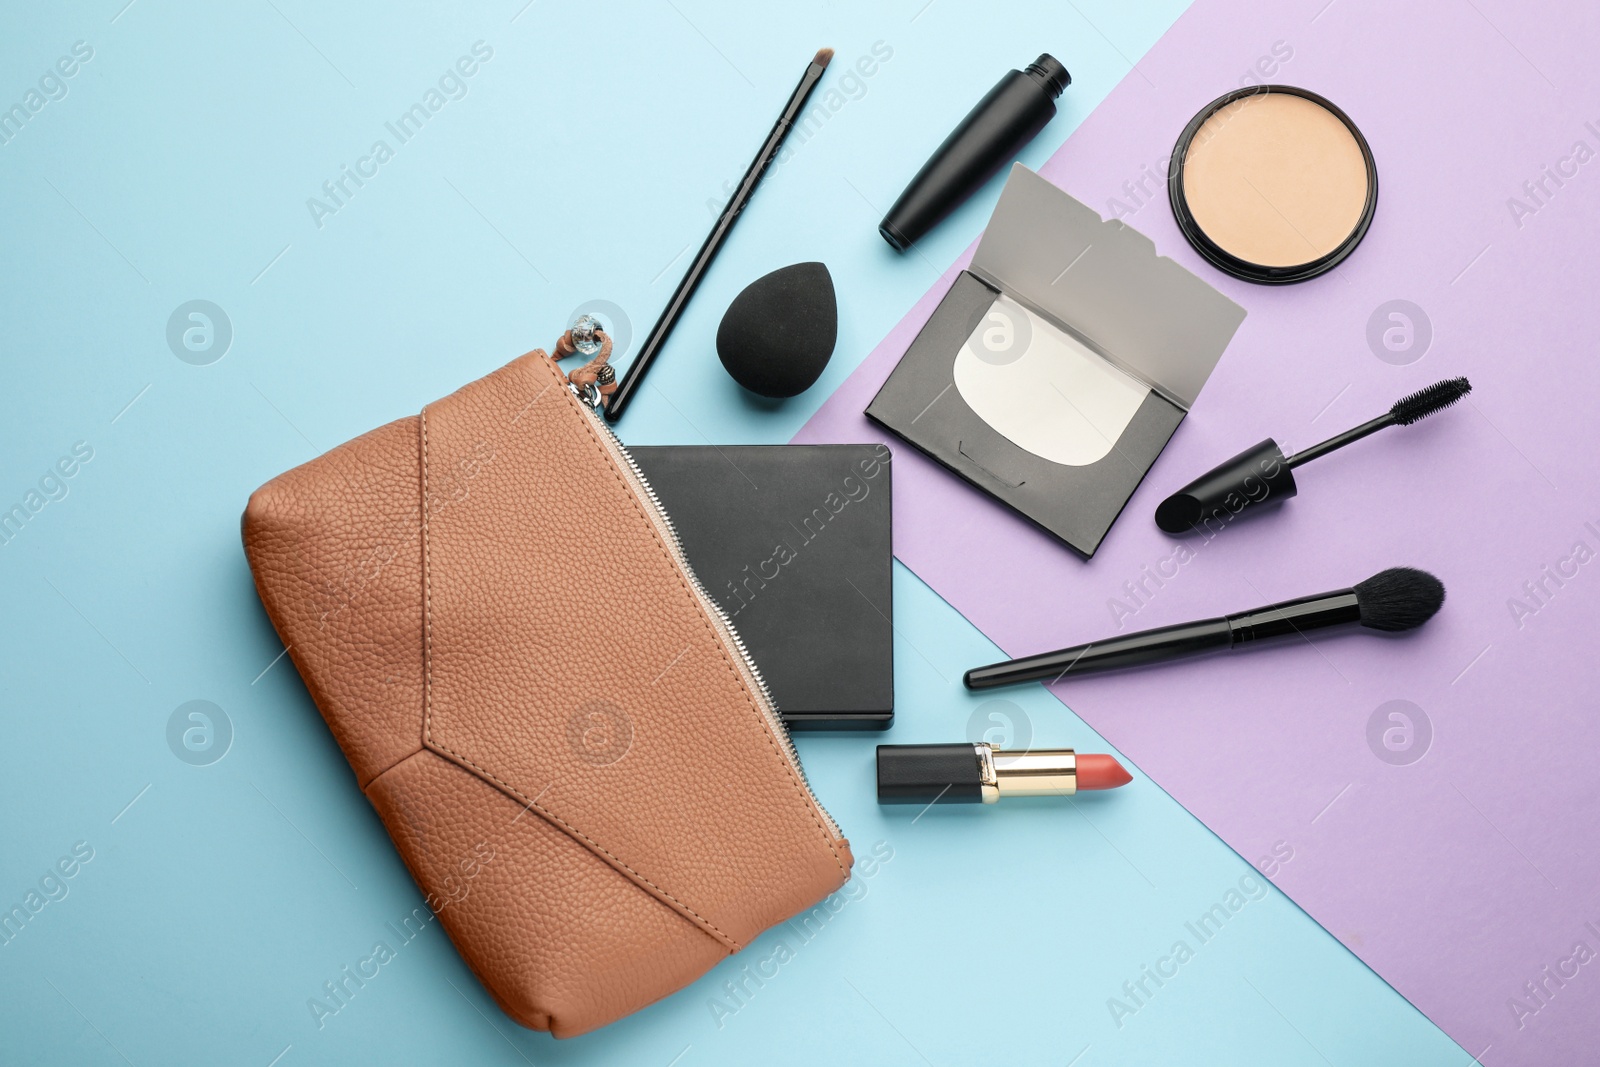 Photo of Flat lay composition with facial oil blotting tissues and makeup products on color background. Mattifying wipes